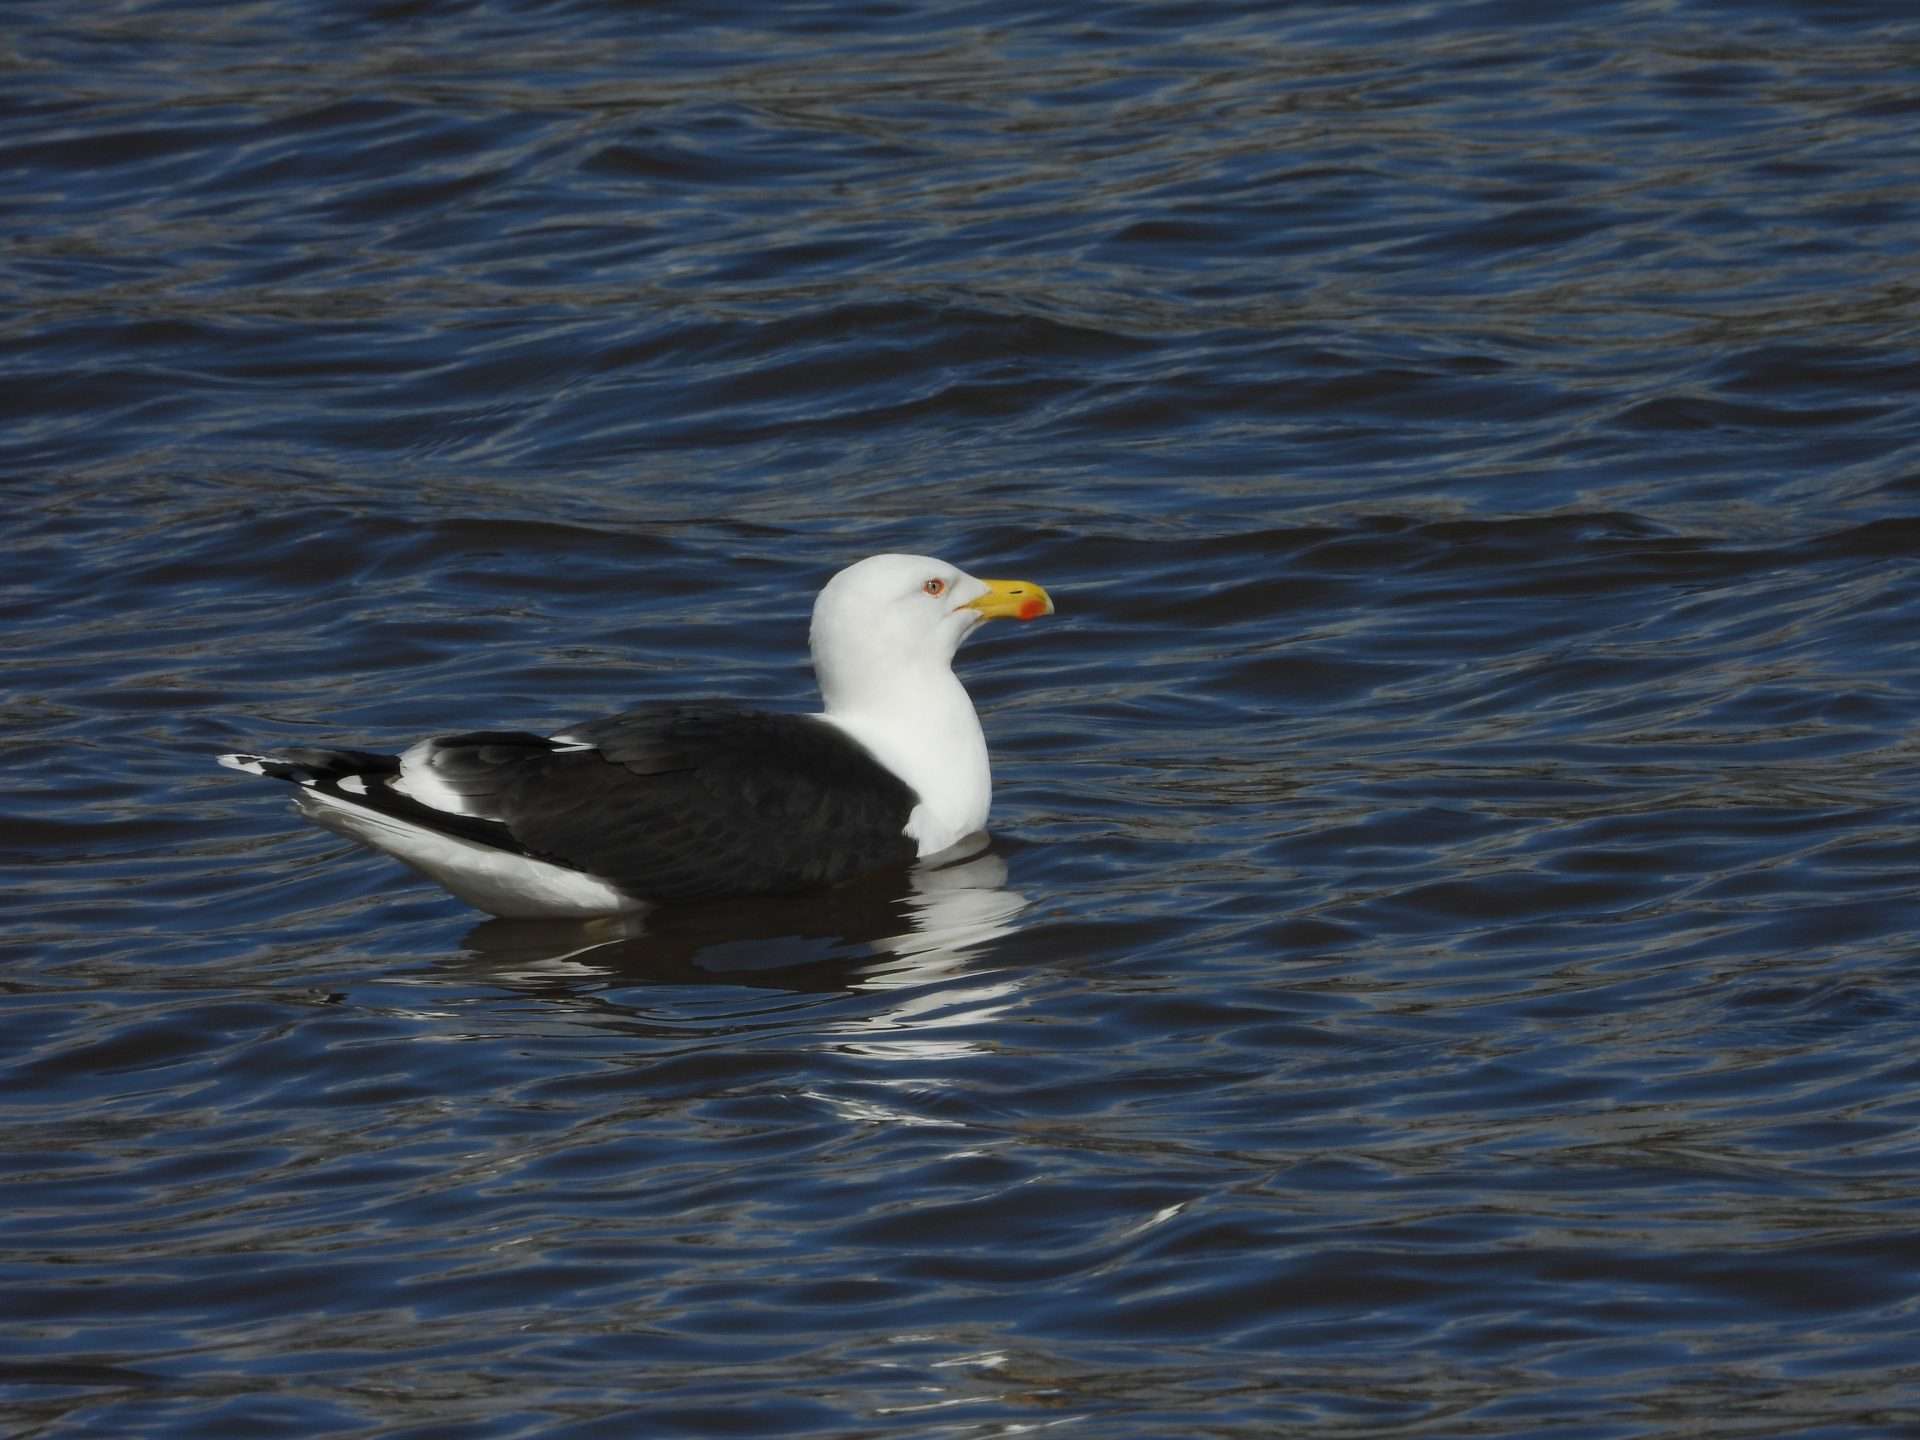 Lesser Black-backed Gull by Kenneth Bradley at Combe cellars